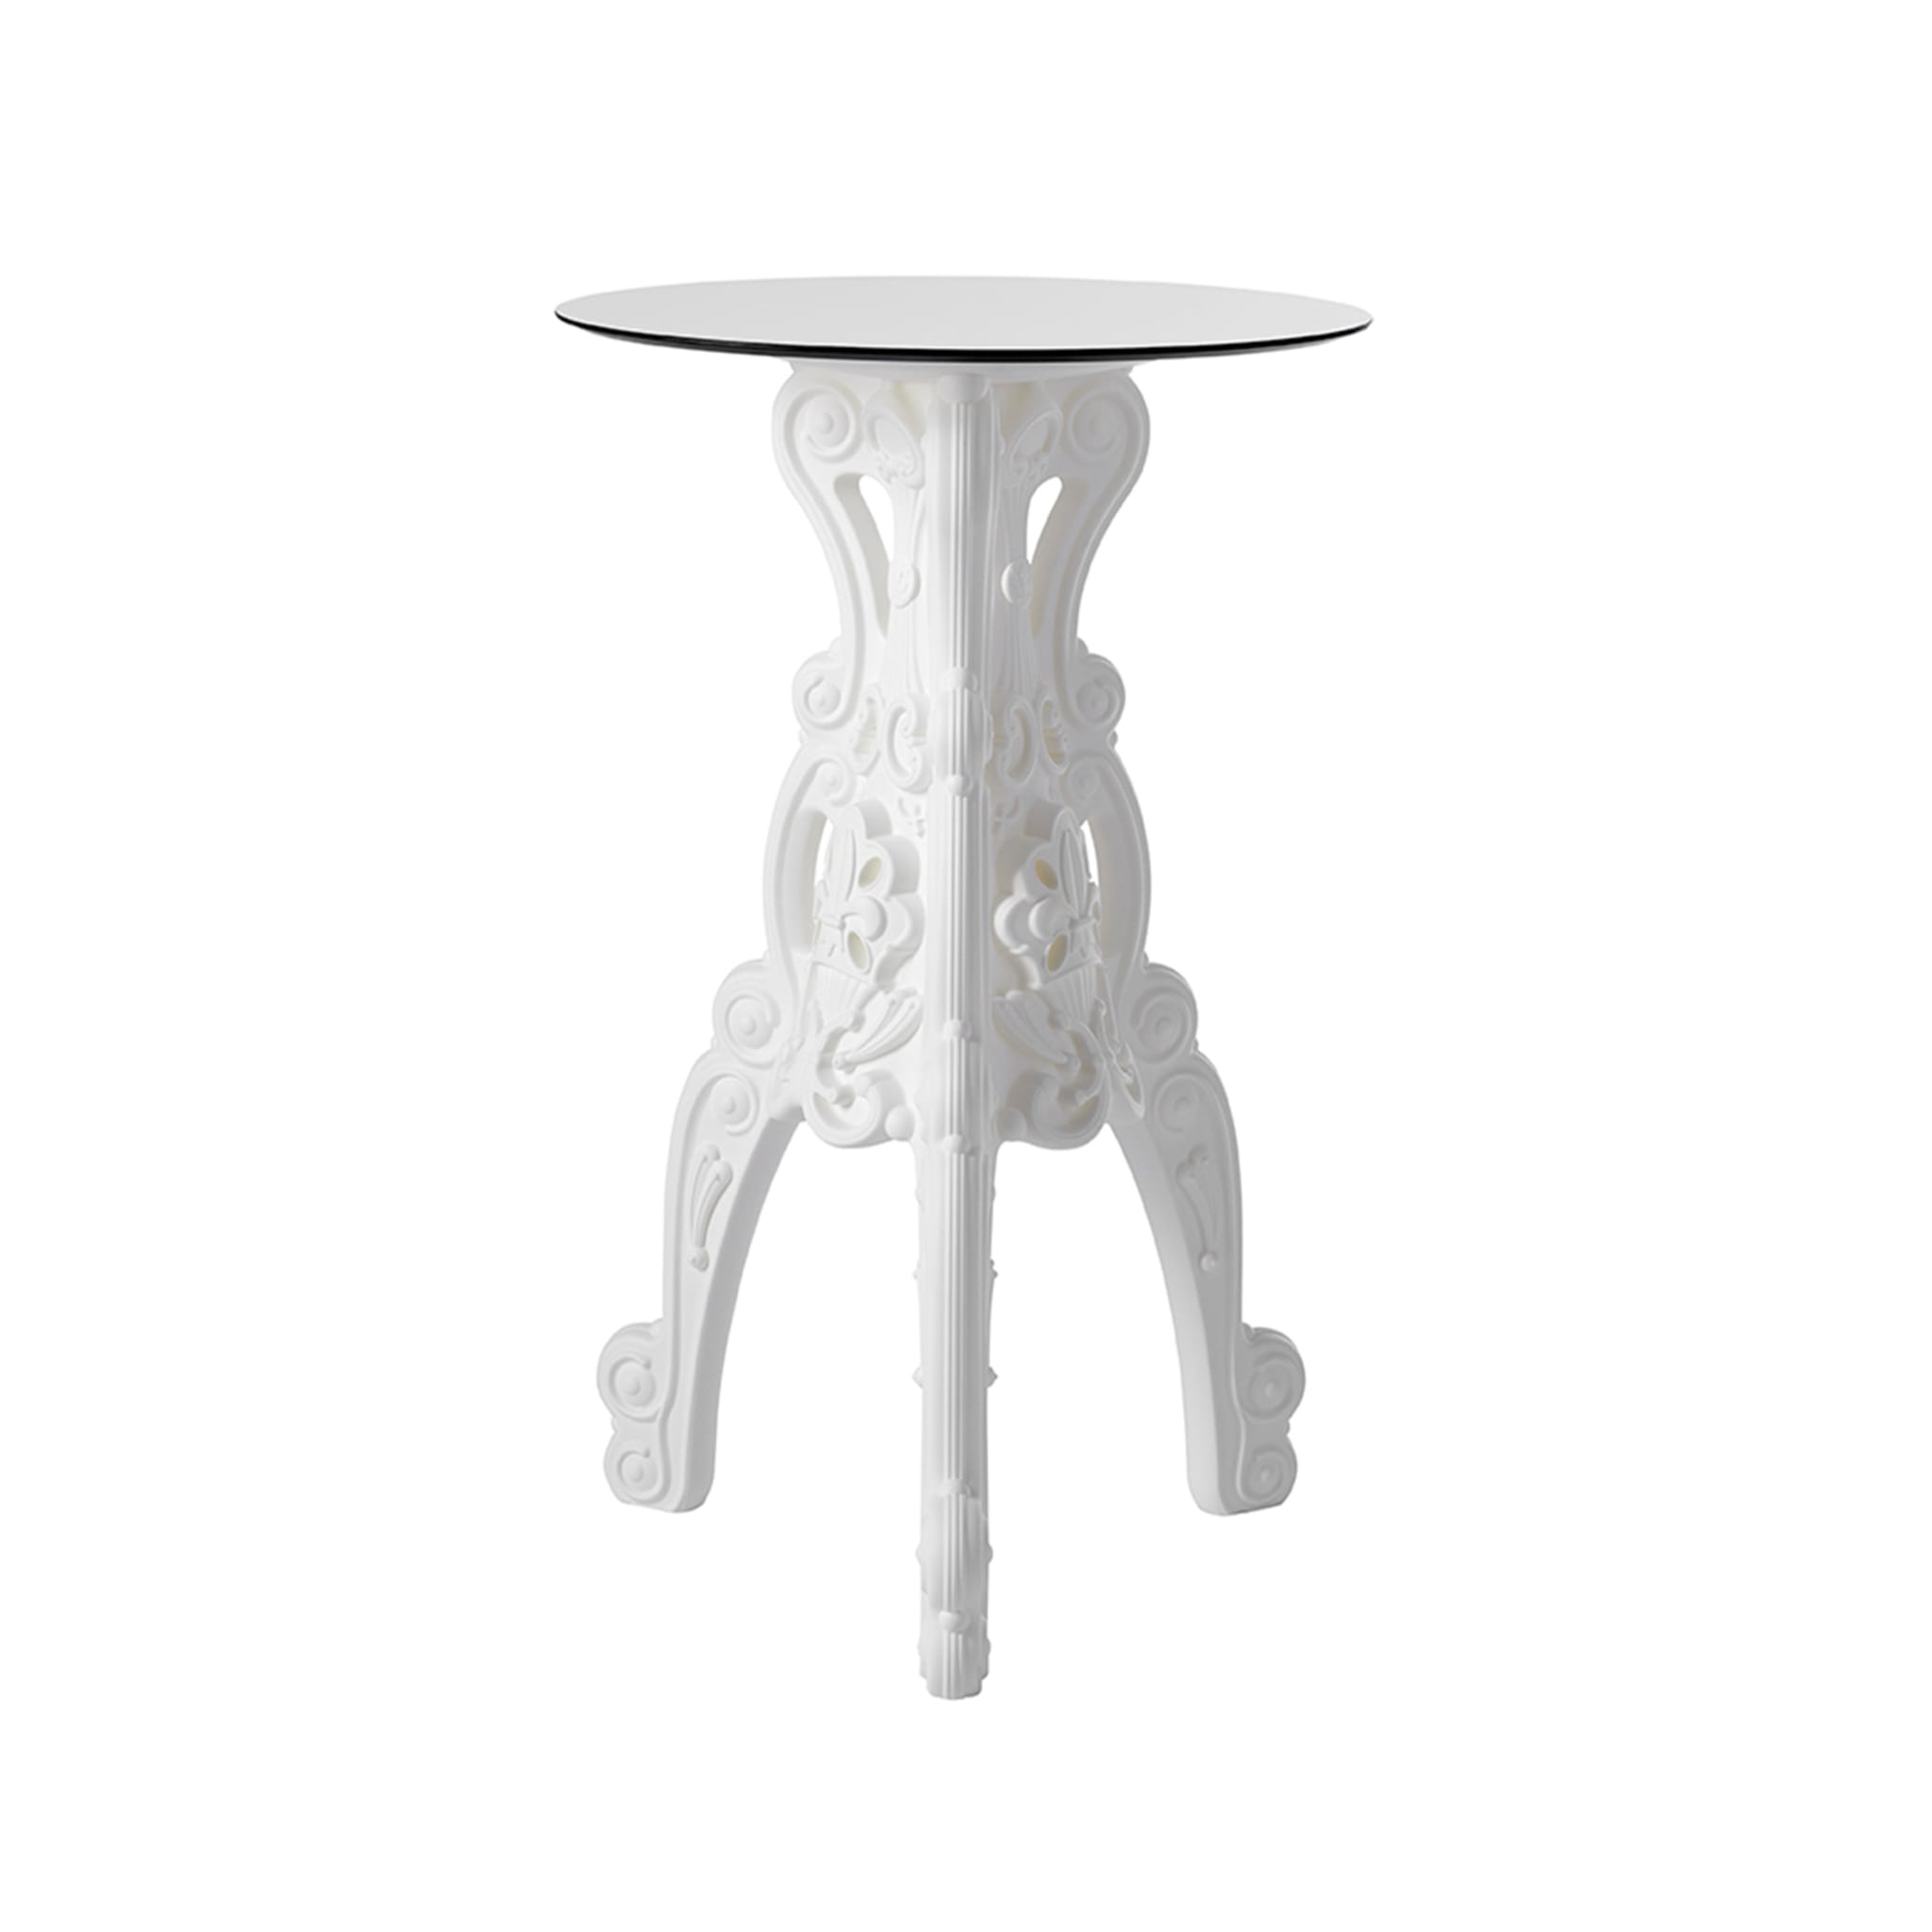 Master of Love White Bistro Table with Round Top - Alternative view 1